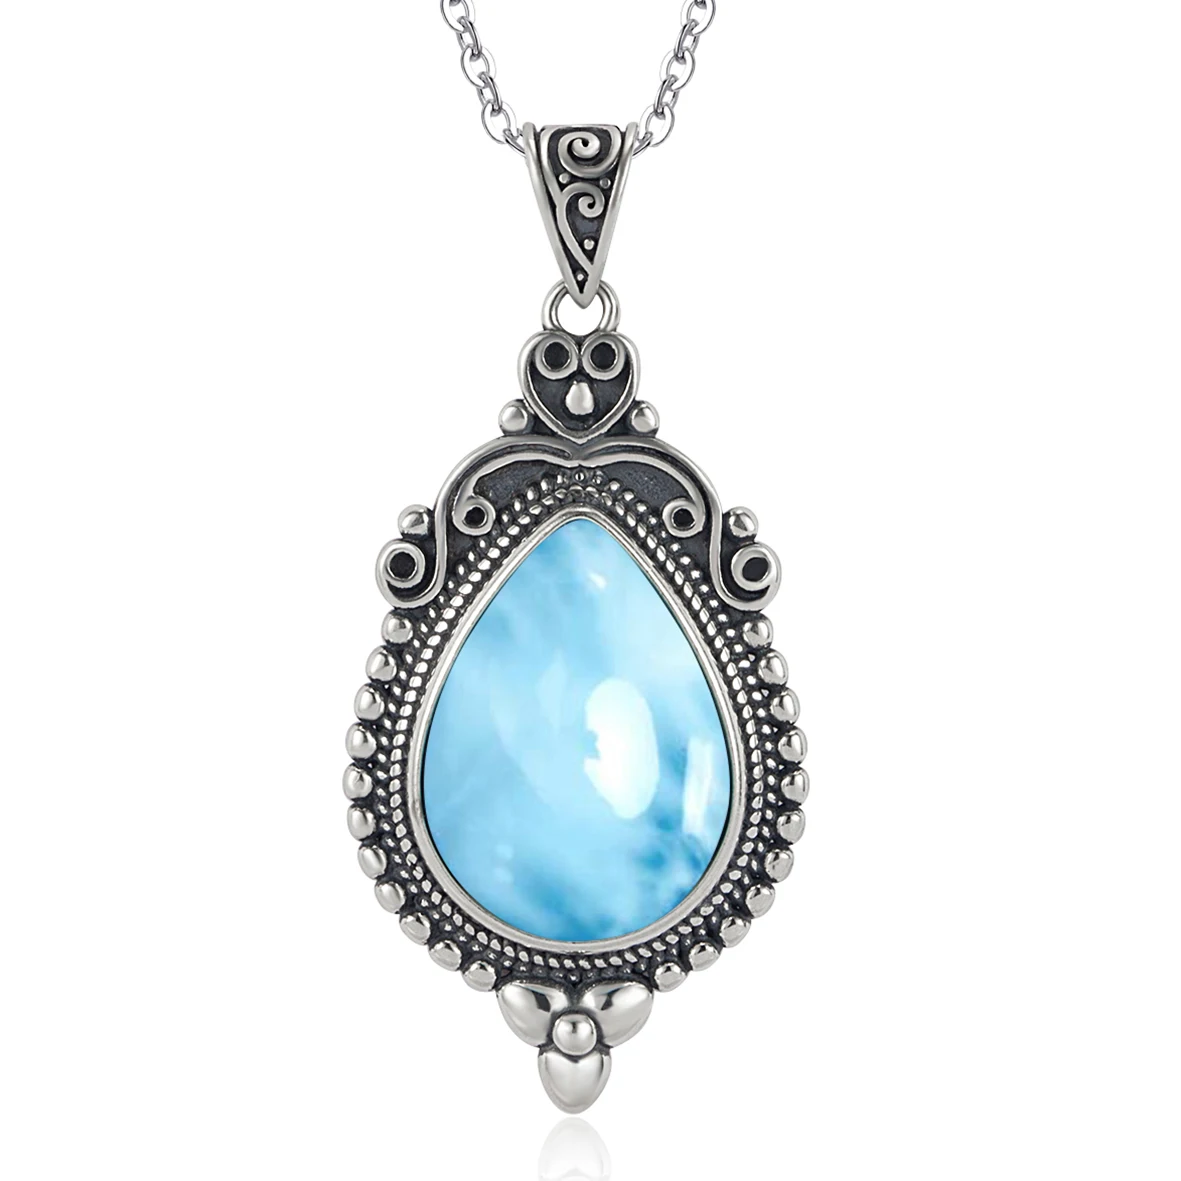 

Antique Vintage Designs Pear 18x13mm Natural Dominica Larimar Drop Pendant Necklace in 925 Sterling Silver